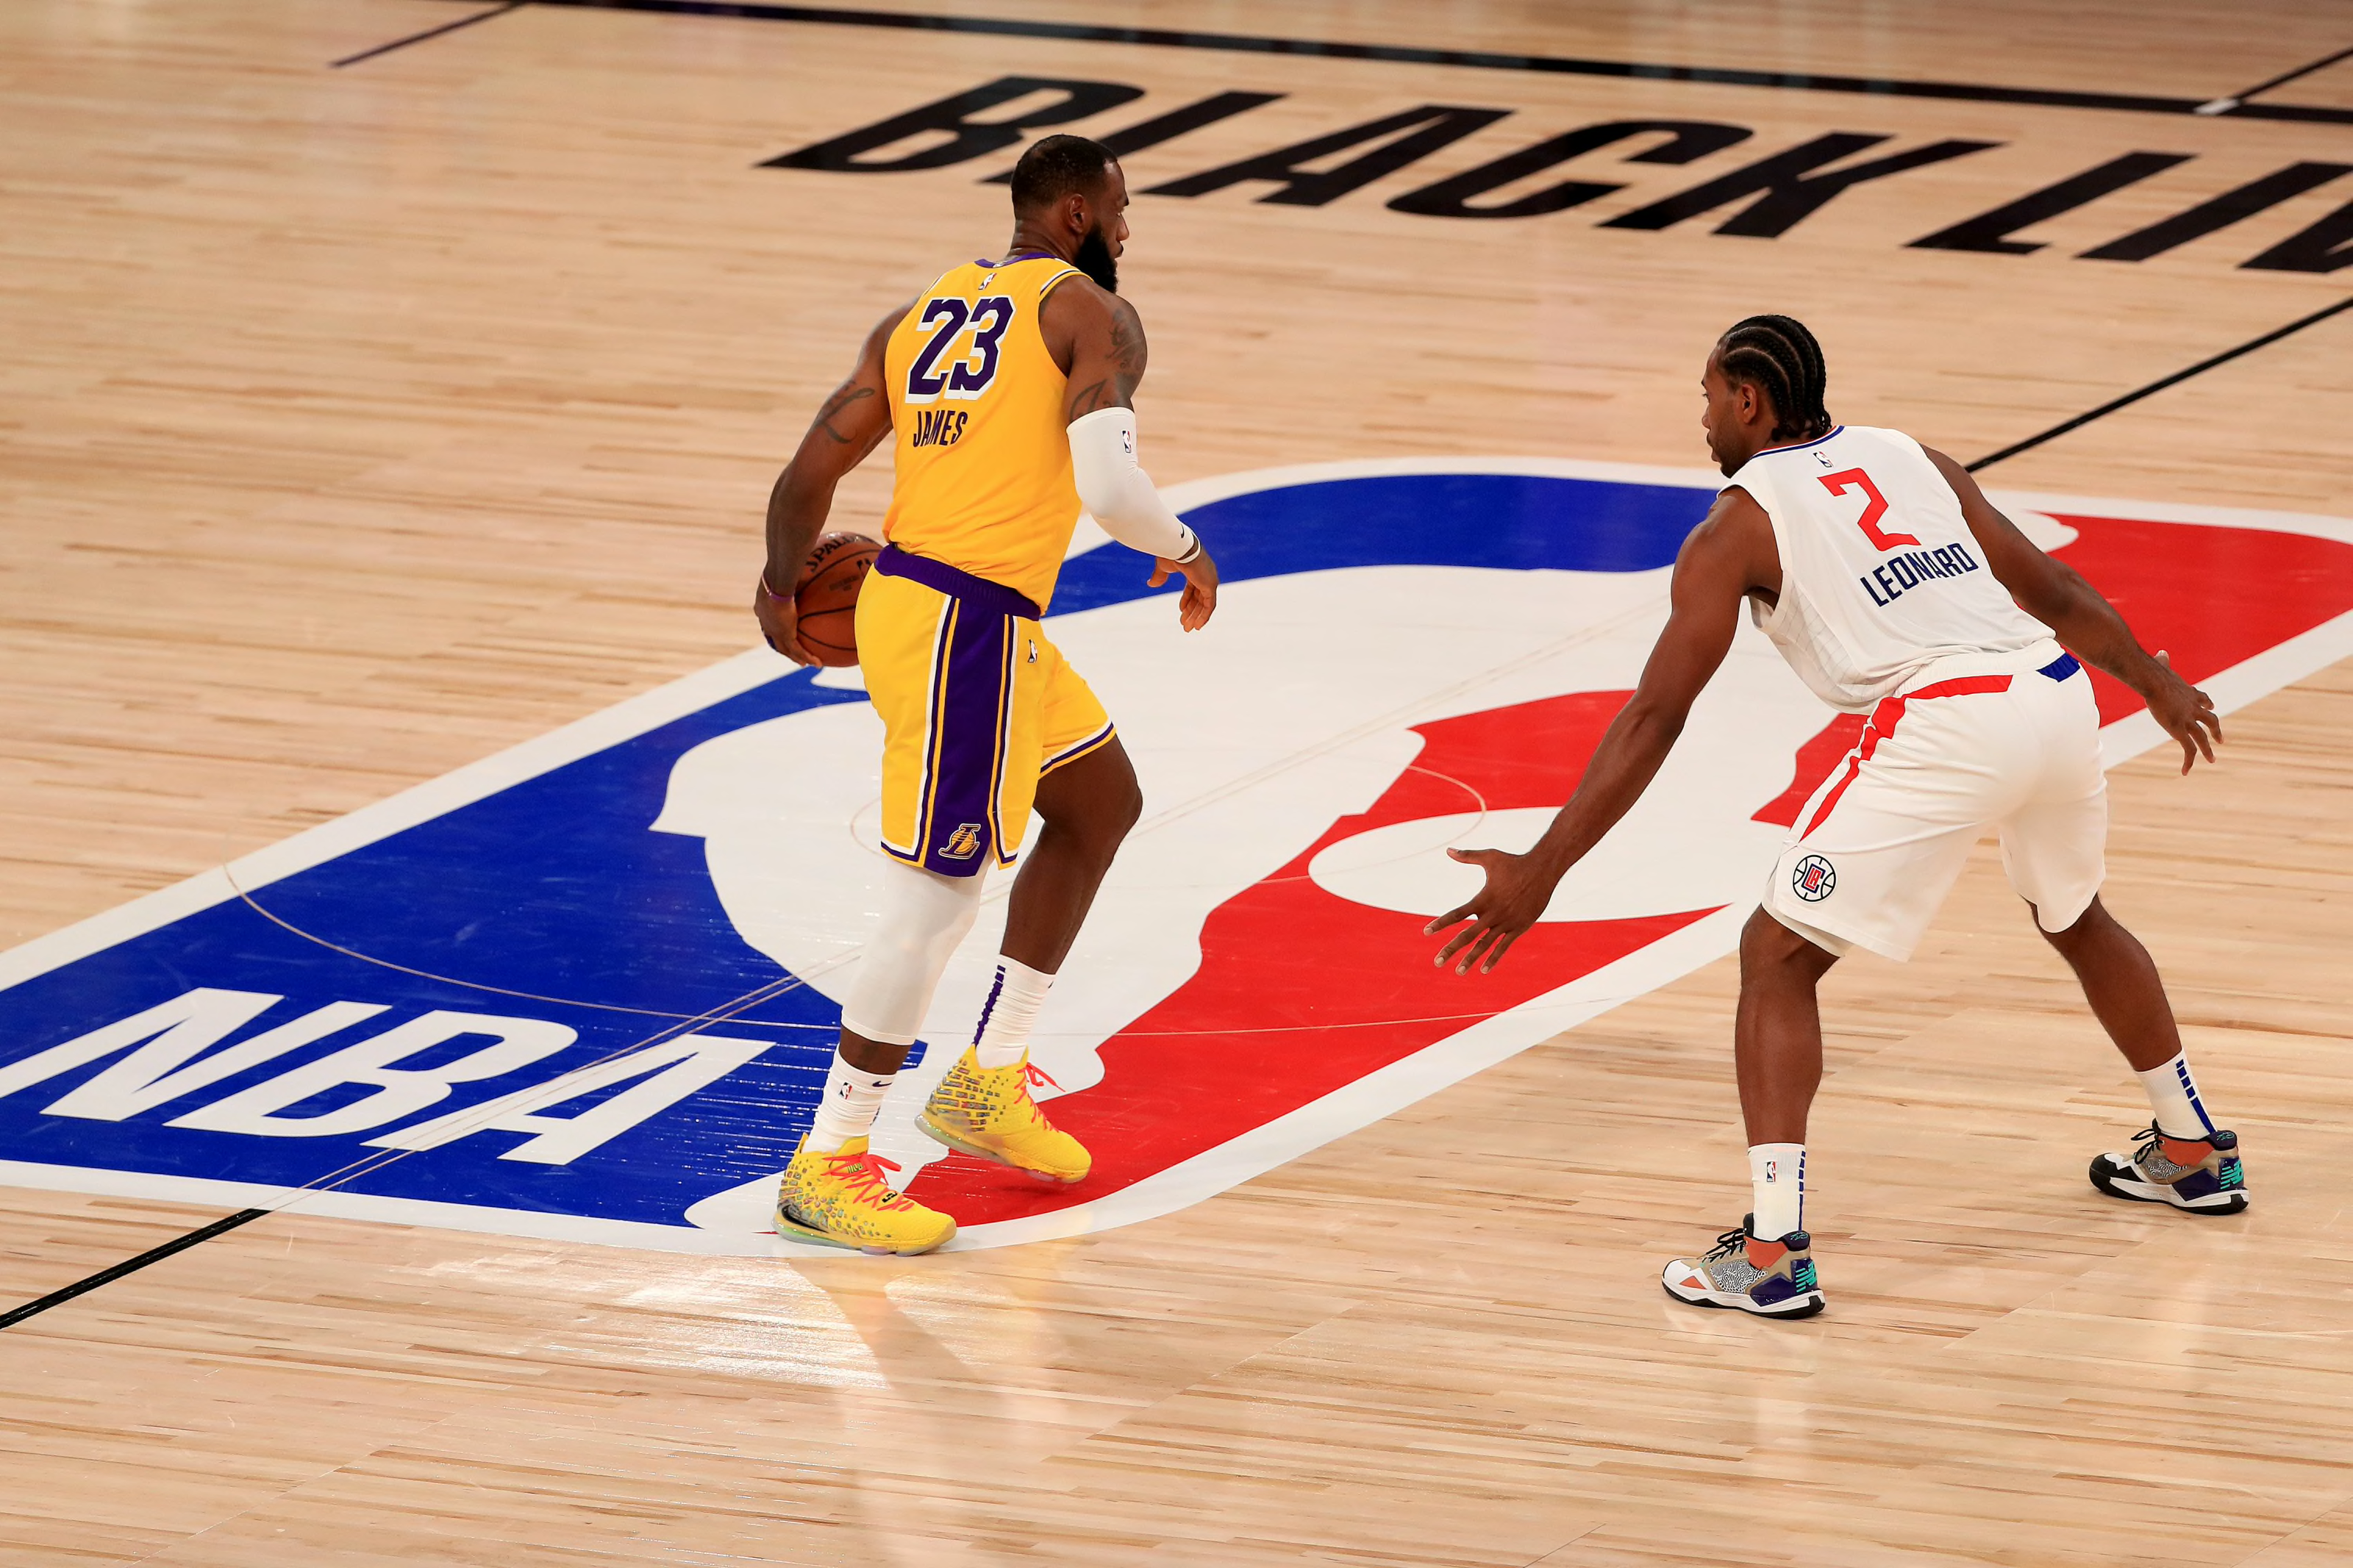 Los Angeles Lakers: Round-by-round predictions for the NBA Playoffs